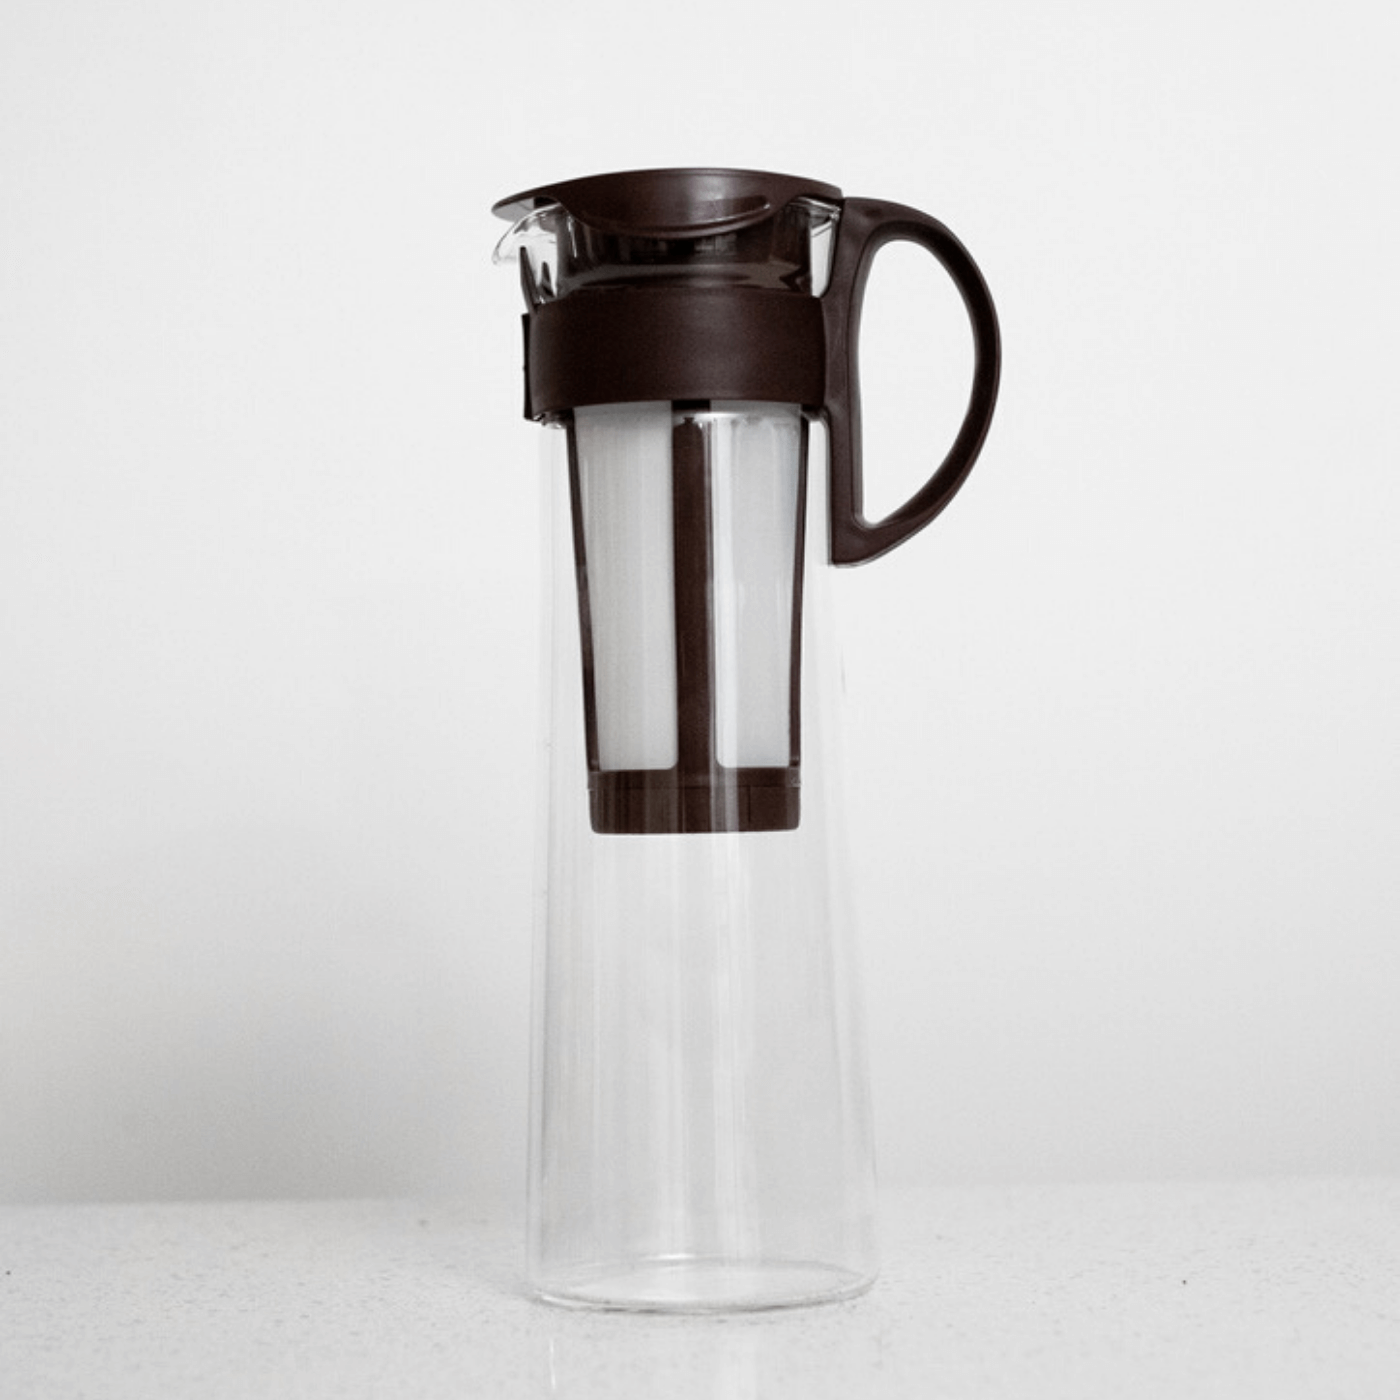 Hario Cold Brew Pot perfect for making Frio cold brew by Alma Coffee